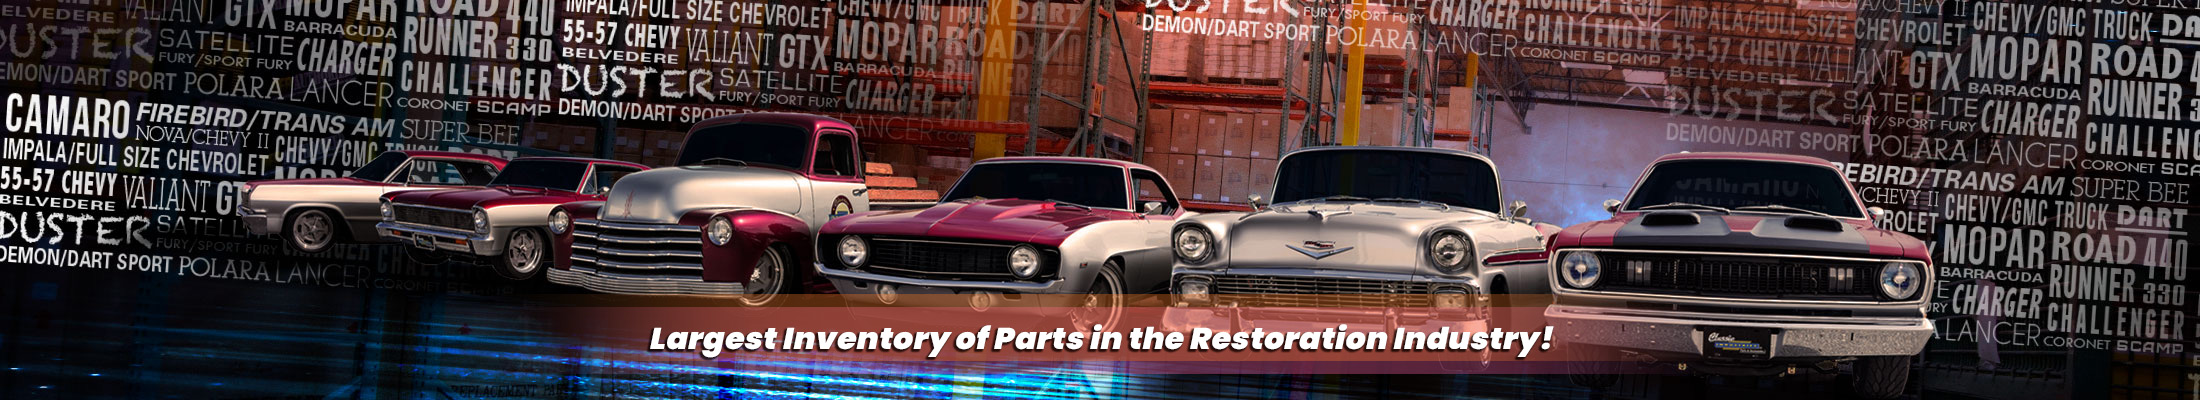 Largest Inventory of Parts in the Restoration Industry!